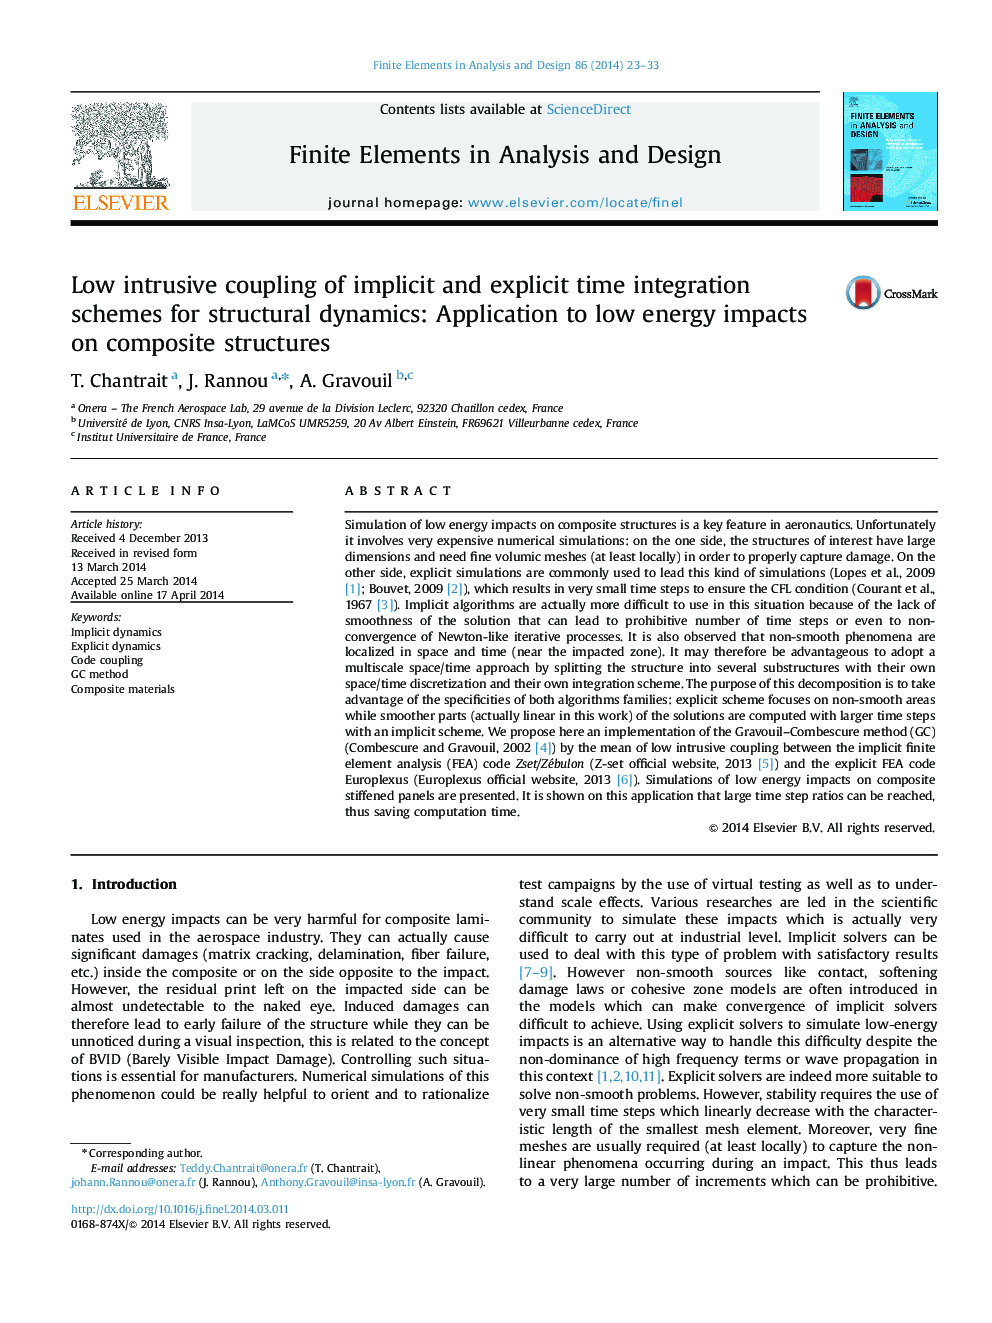 Low intrusive coupling of implicit and explicit time integration schemes for structural dynamics: Application to low energy impacts on composite structures